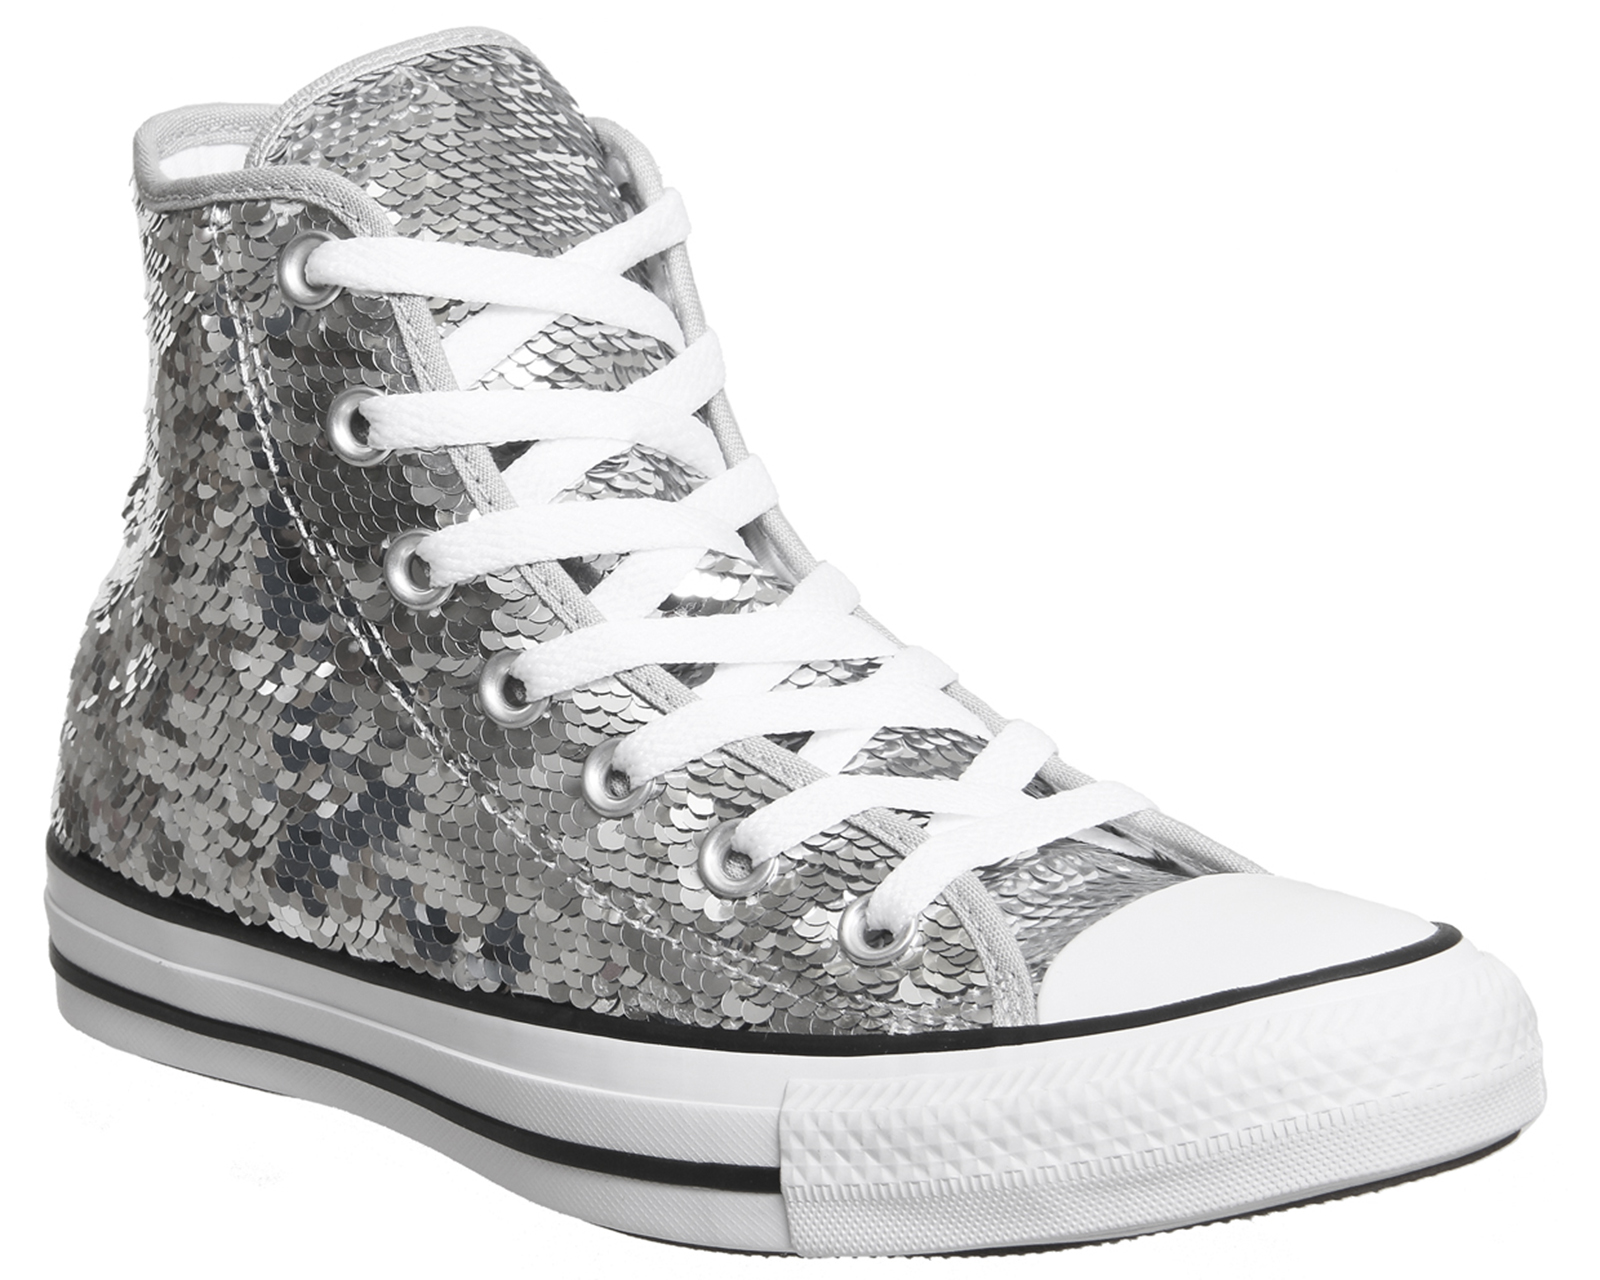 sparkly silver converse uk - 60% remise 